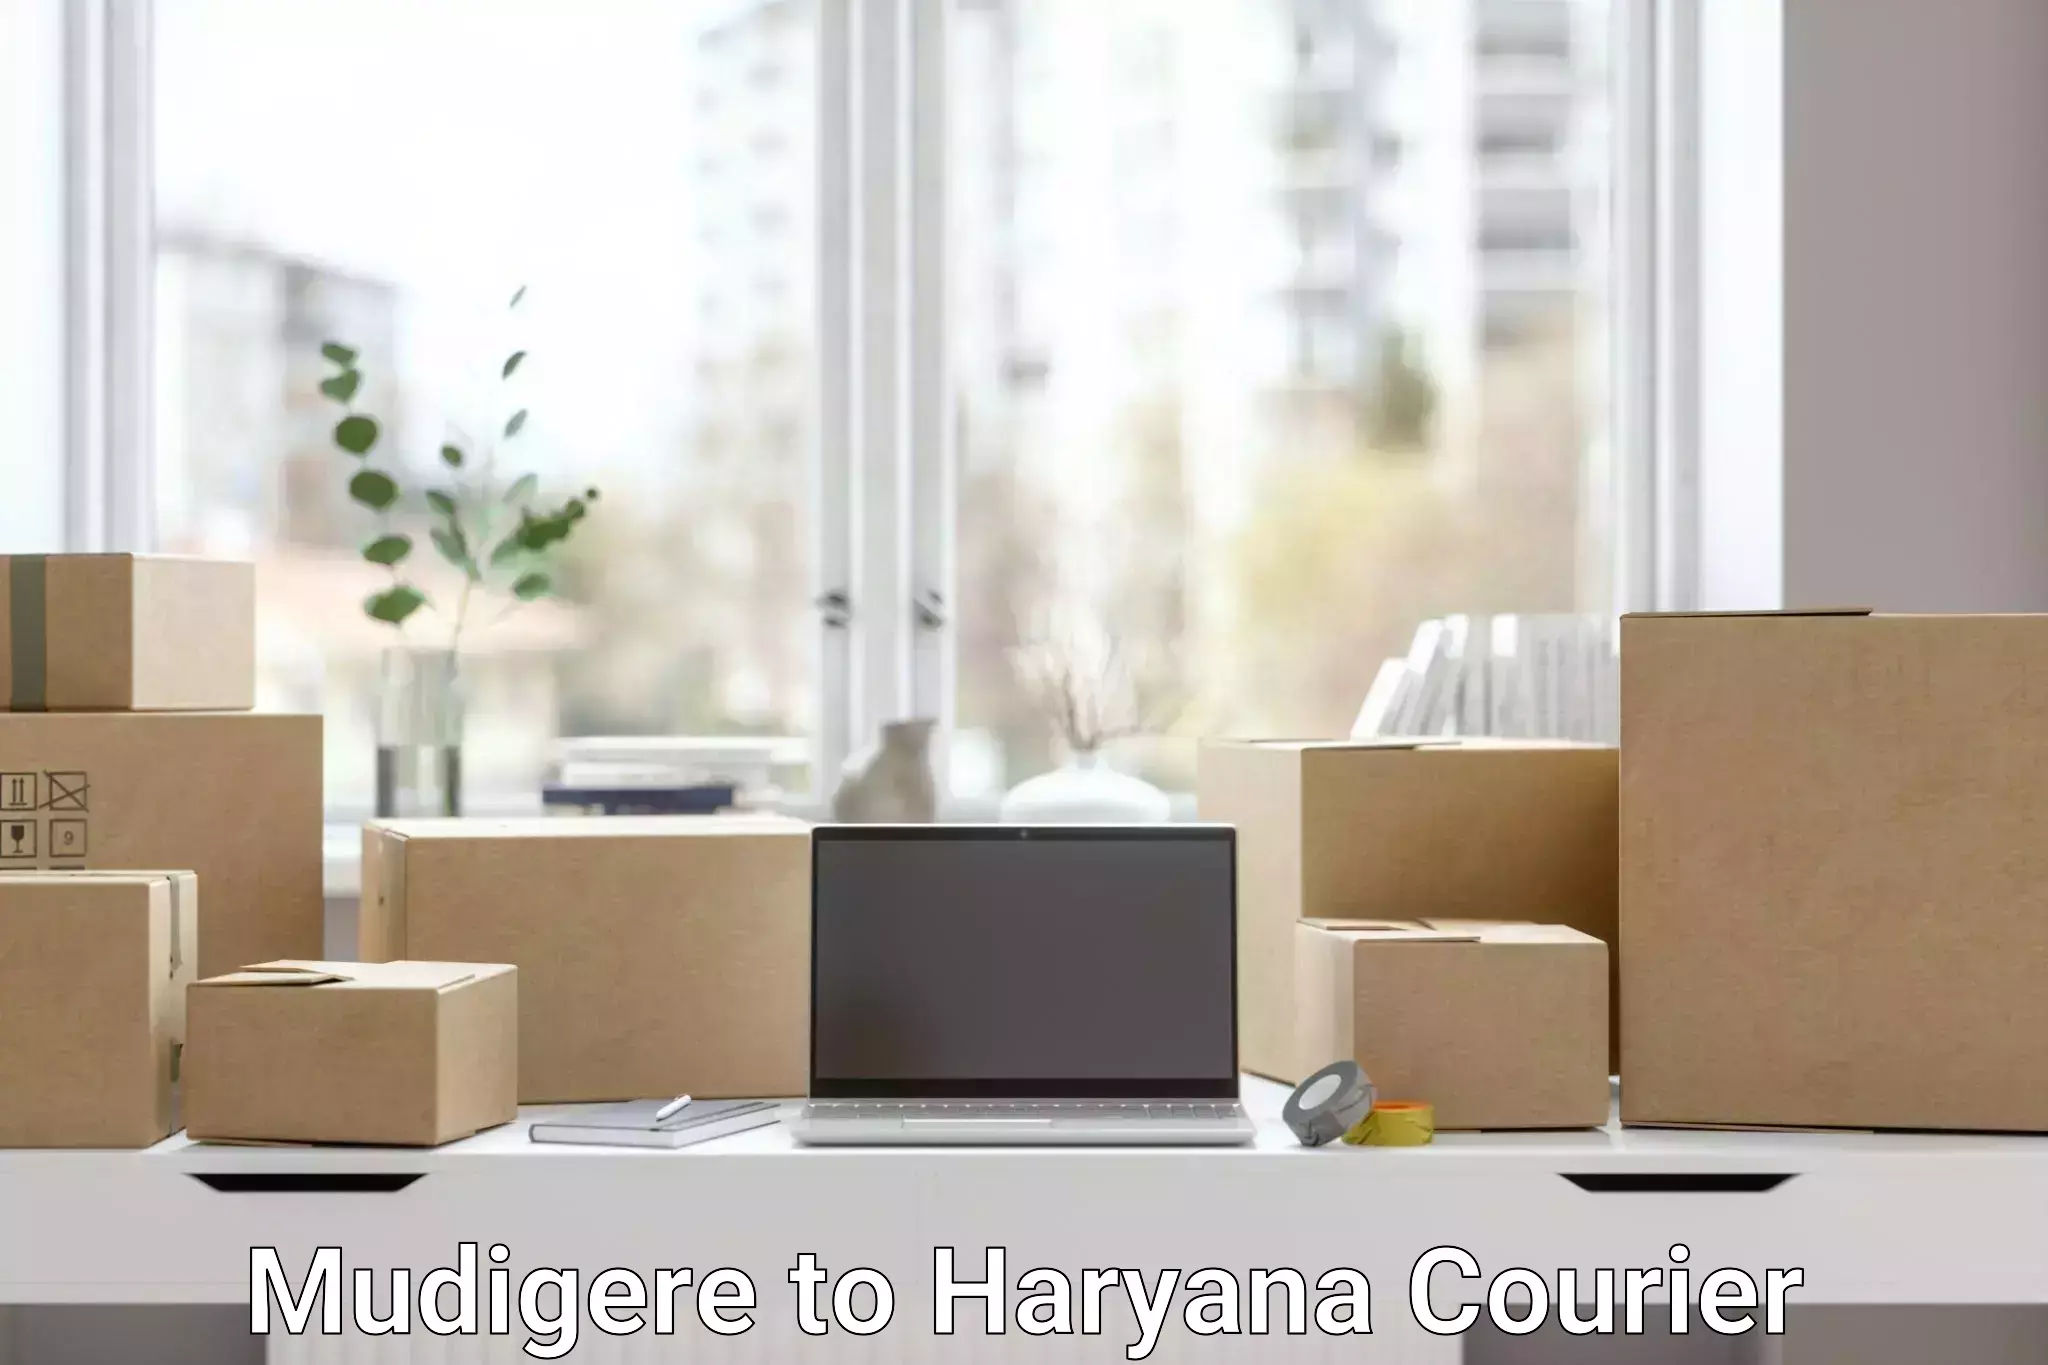 Efficient cargo services Mudigere to NCR Haryana